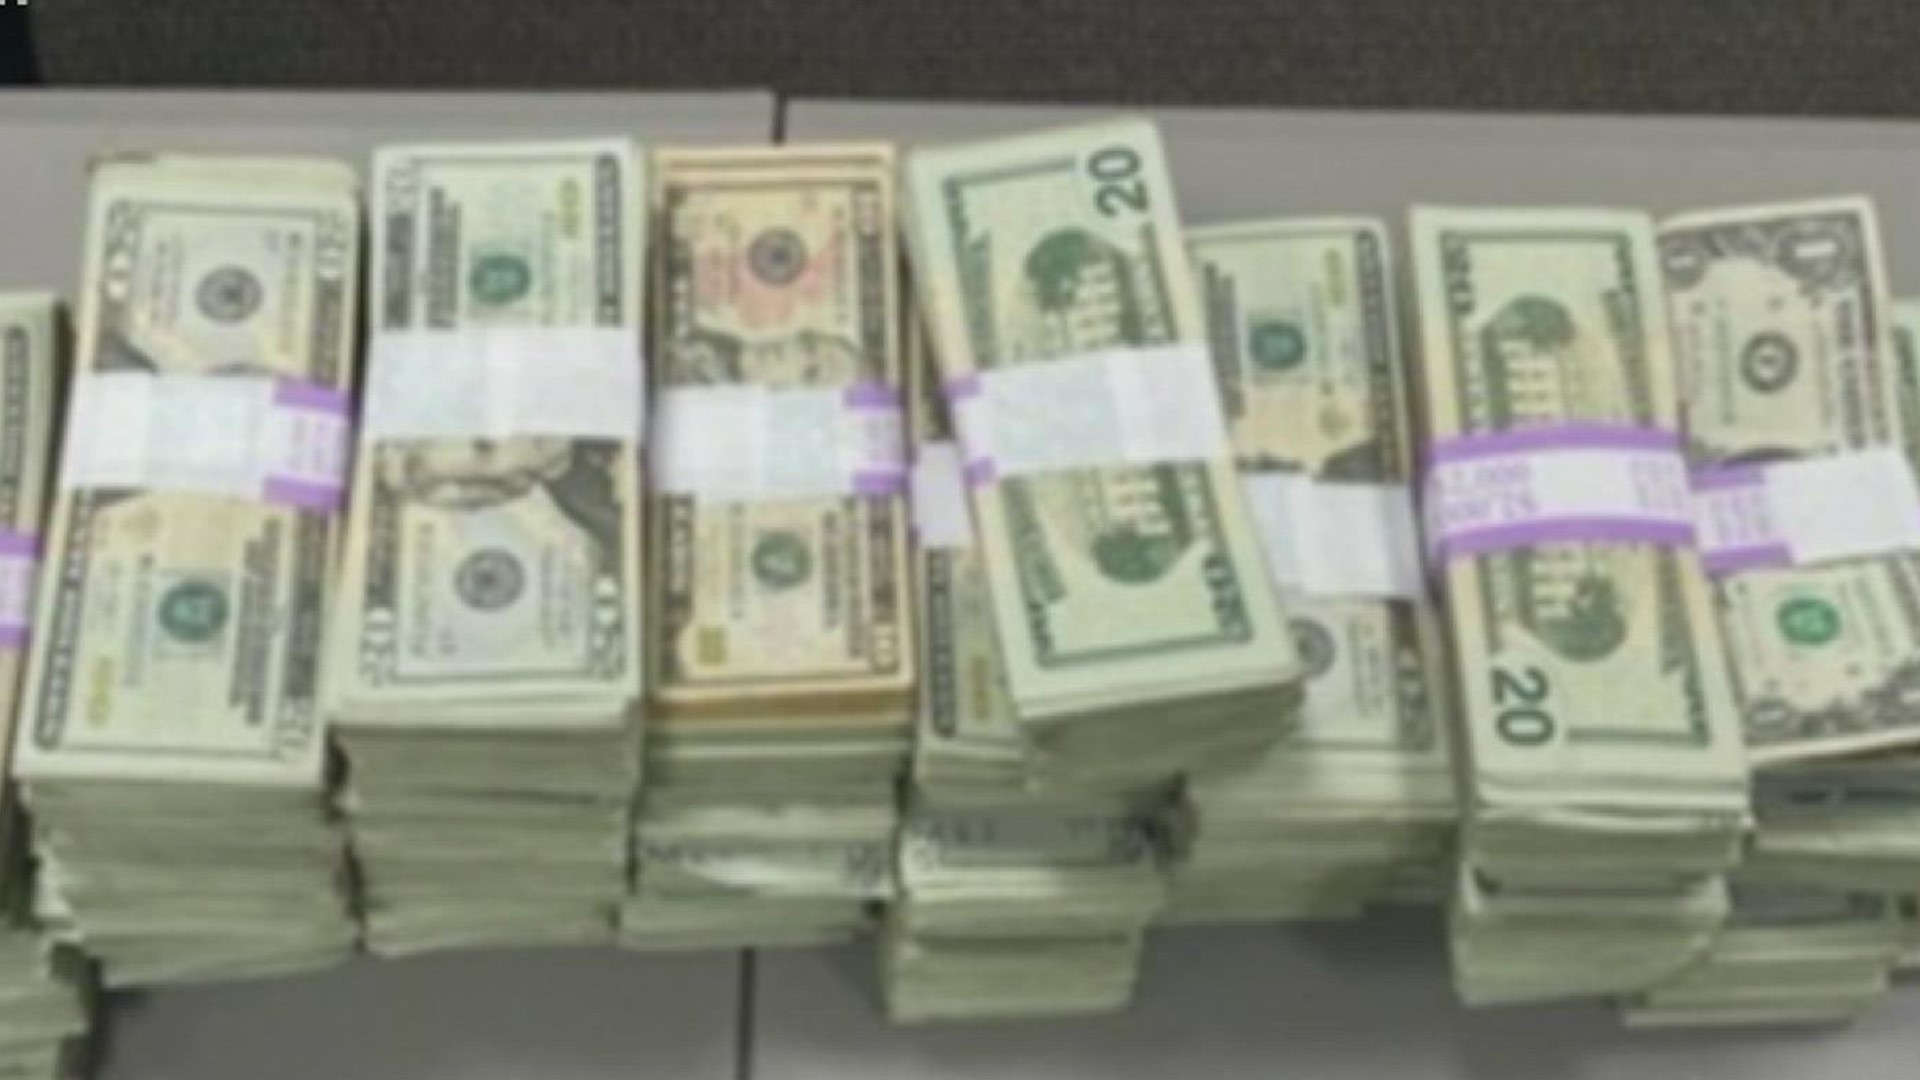 Officers found $114,371 in cash, which was "wrapped in a manner to conceal its presence from K9 narcotic detection," officials said in a statement.